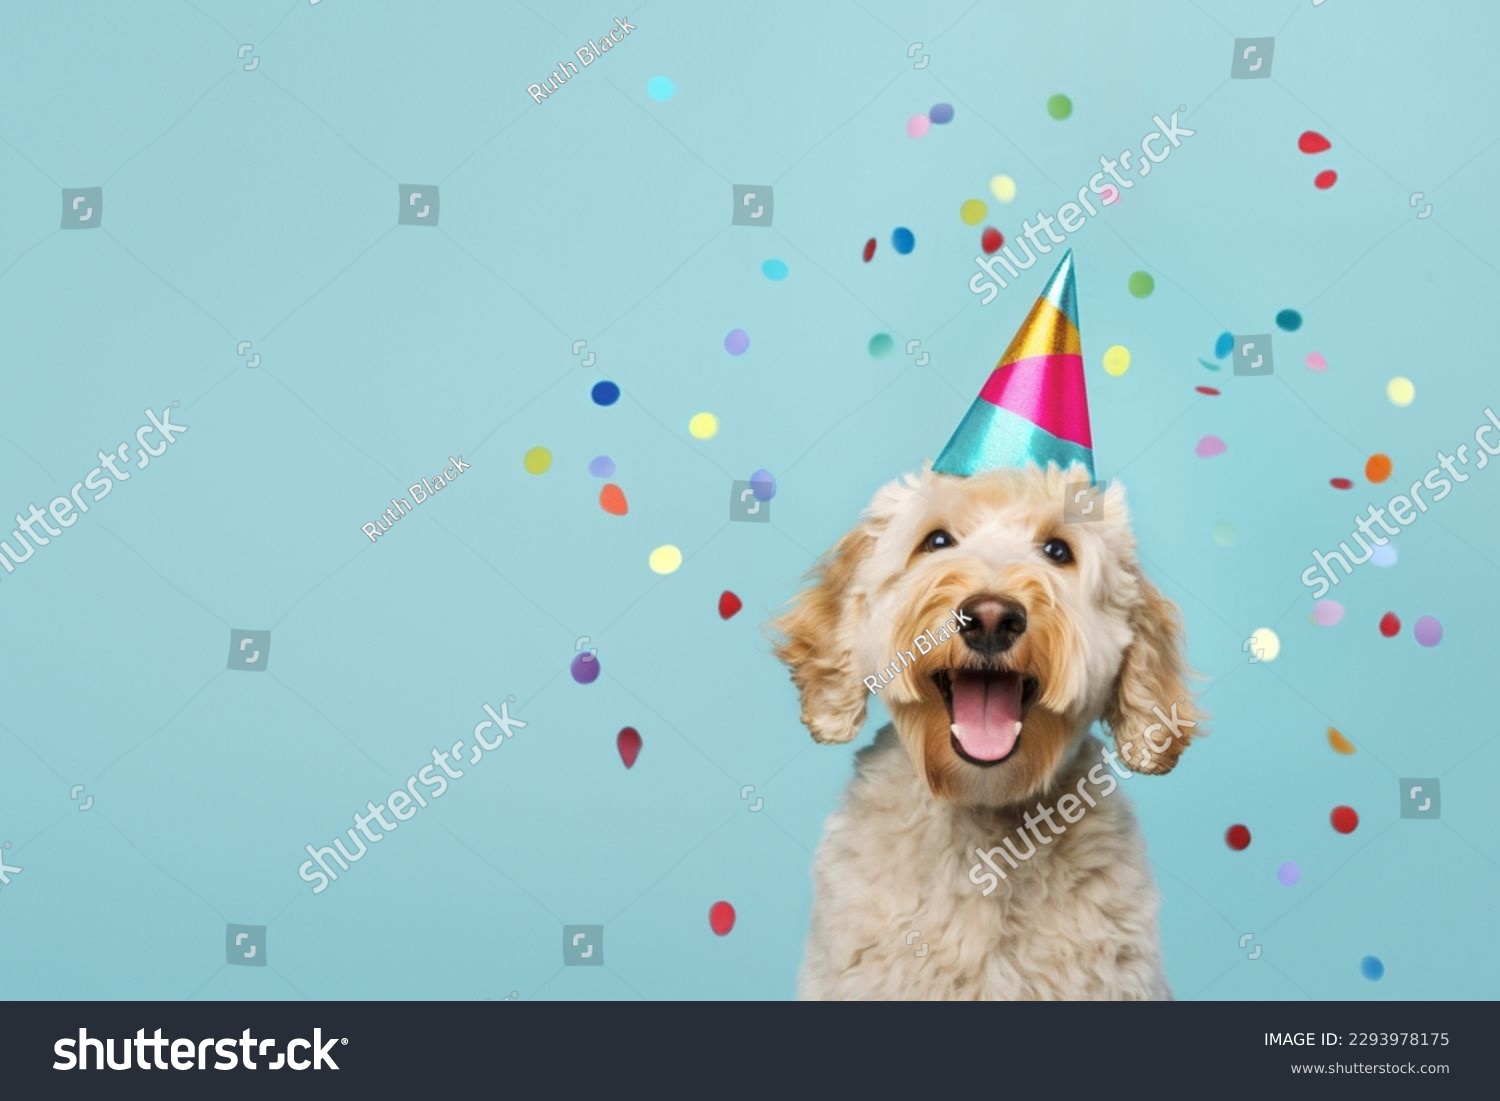 Happy cute labradoodle dog wearing a party hat celebrating at a birthday party, surrounding by falling confetti #2293978175